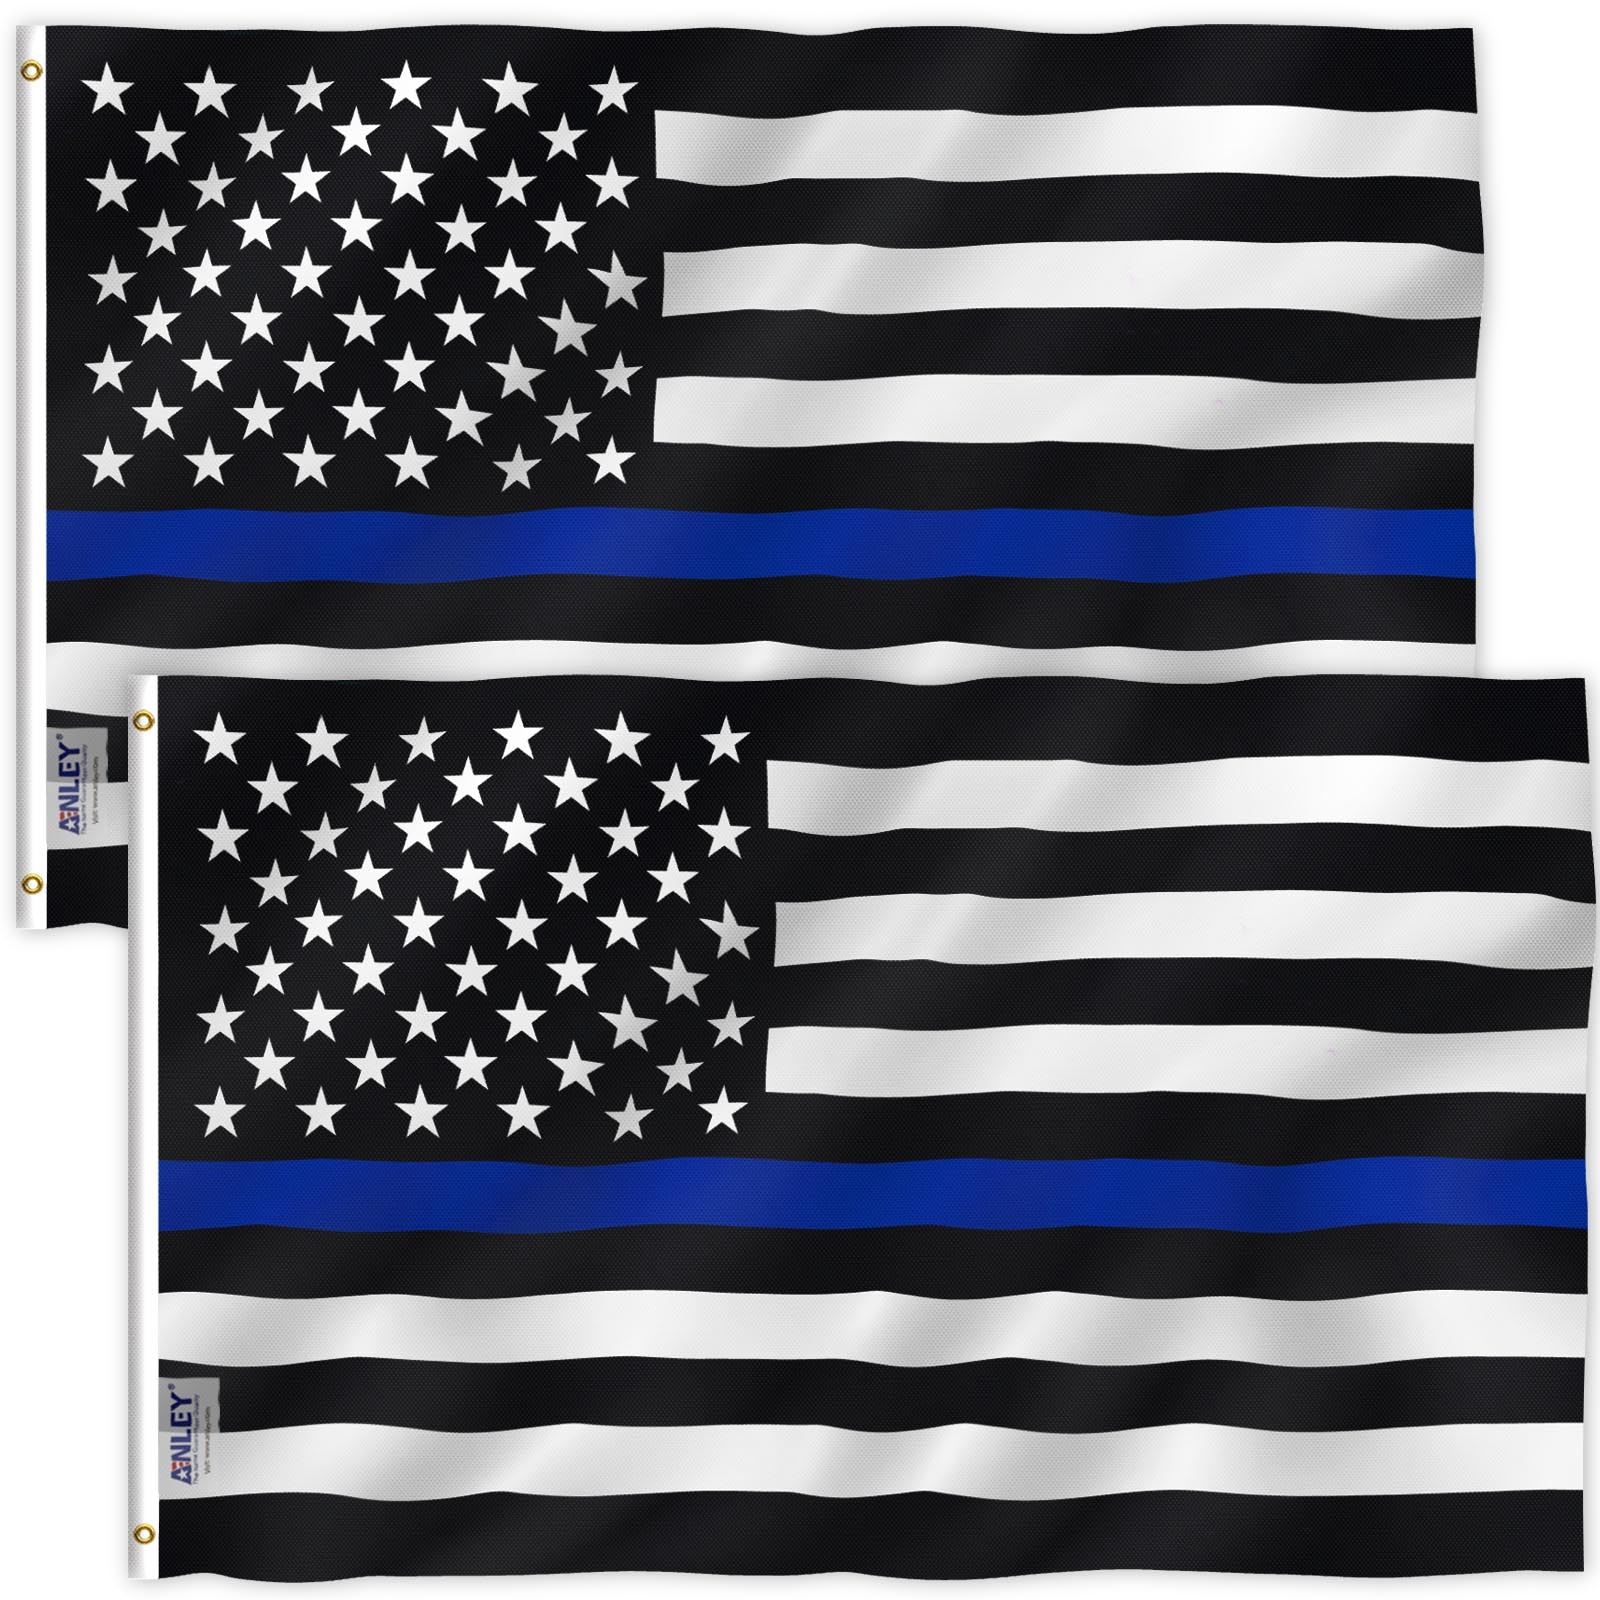 We Support Our Police Flag 3x5 Law Enforcement  Back The Blue Thin Blue Line